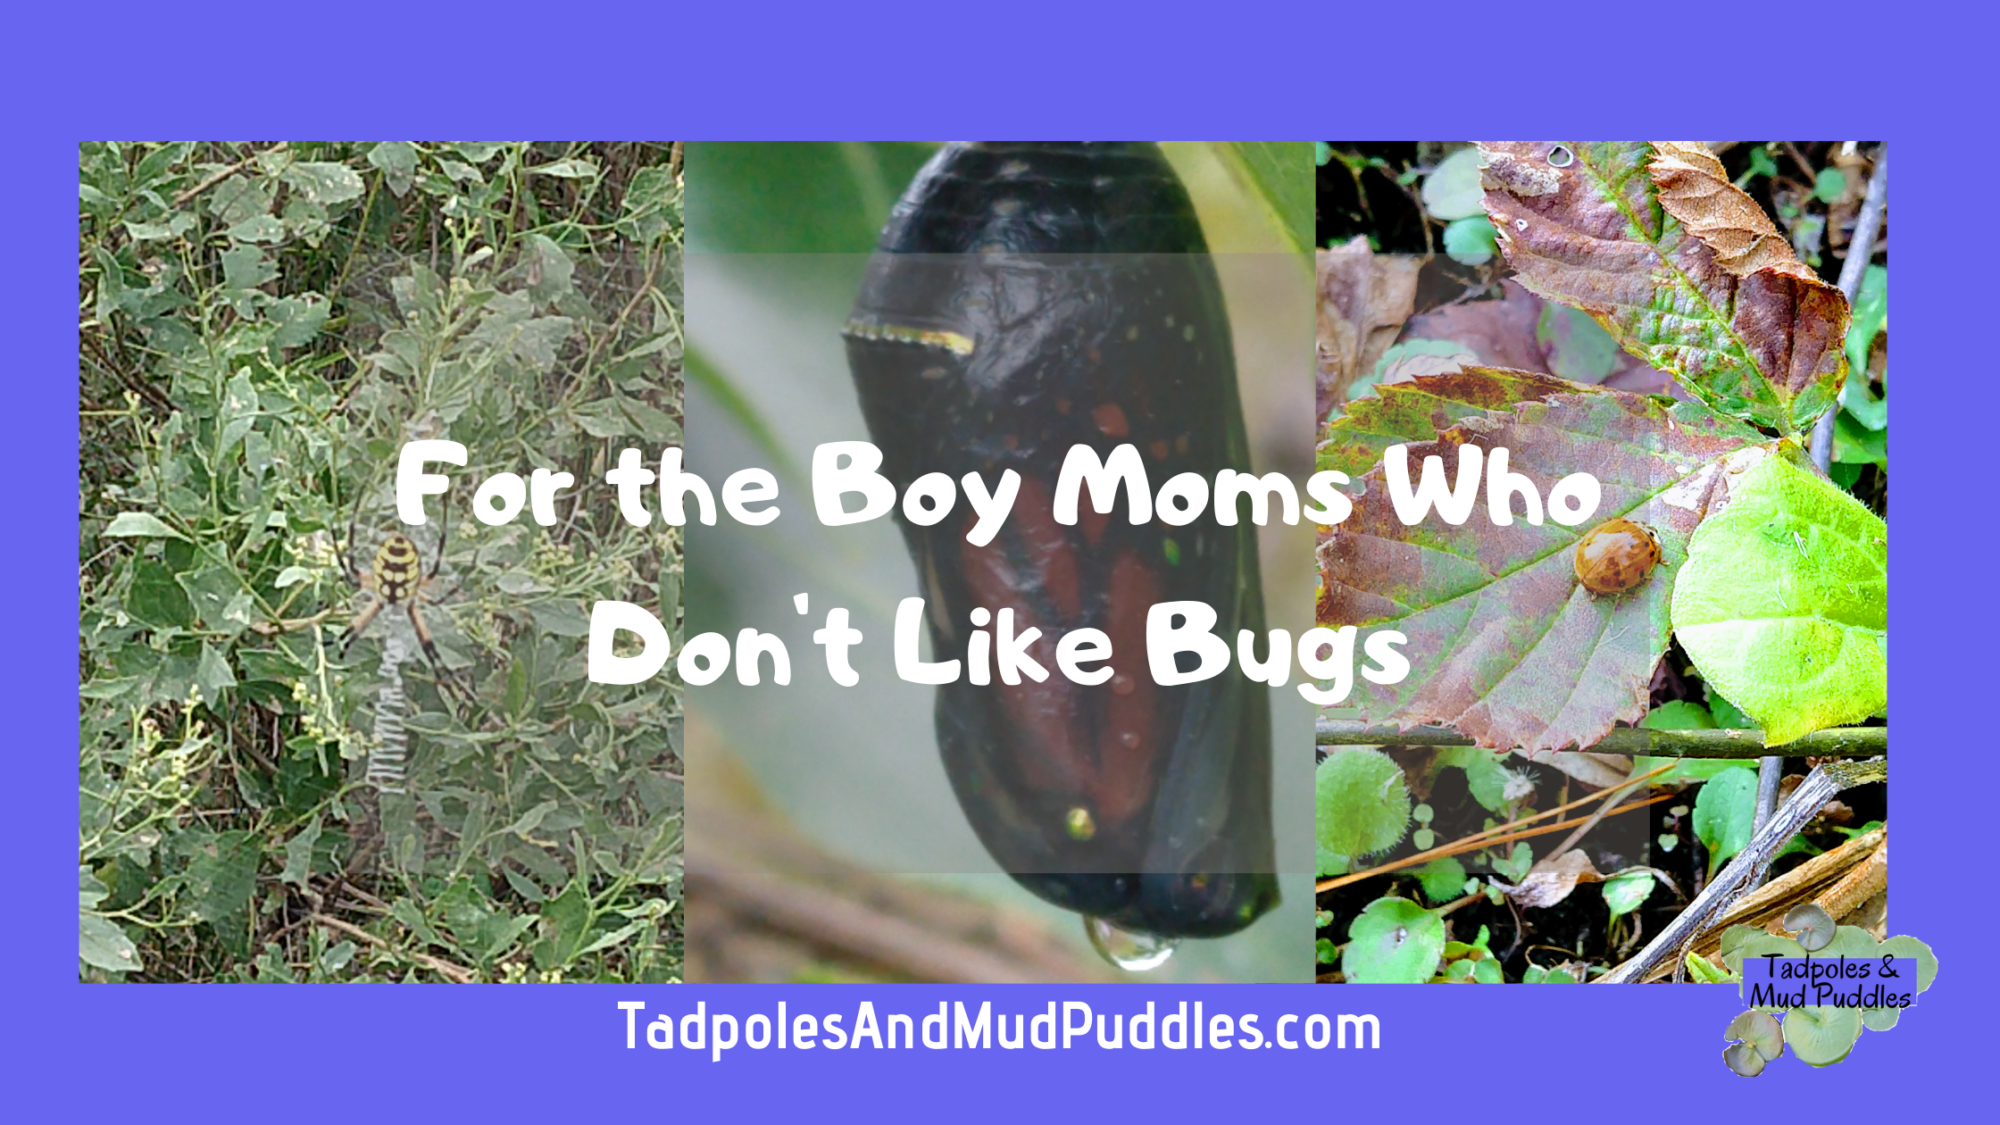 For the boy moms who don't like bugs